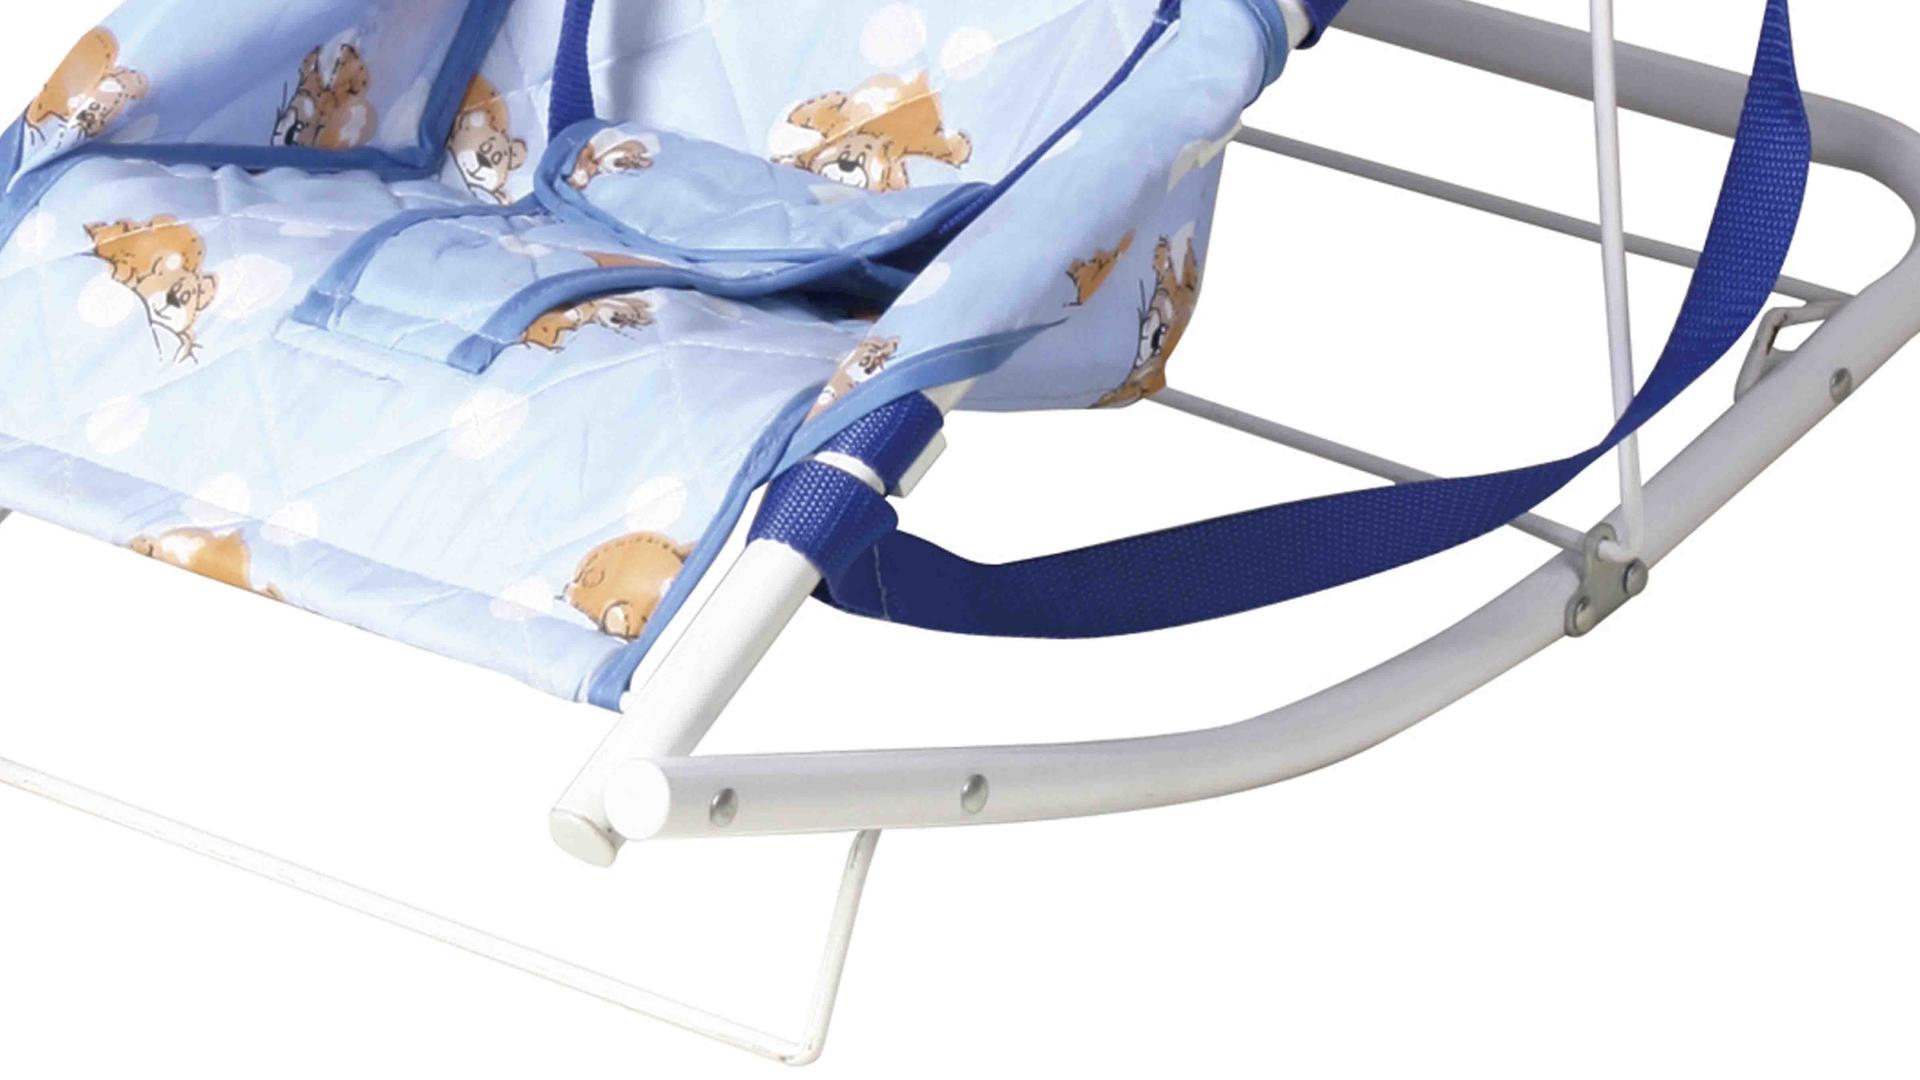 Simple design baby rocker chair which can be a free gift 403